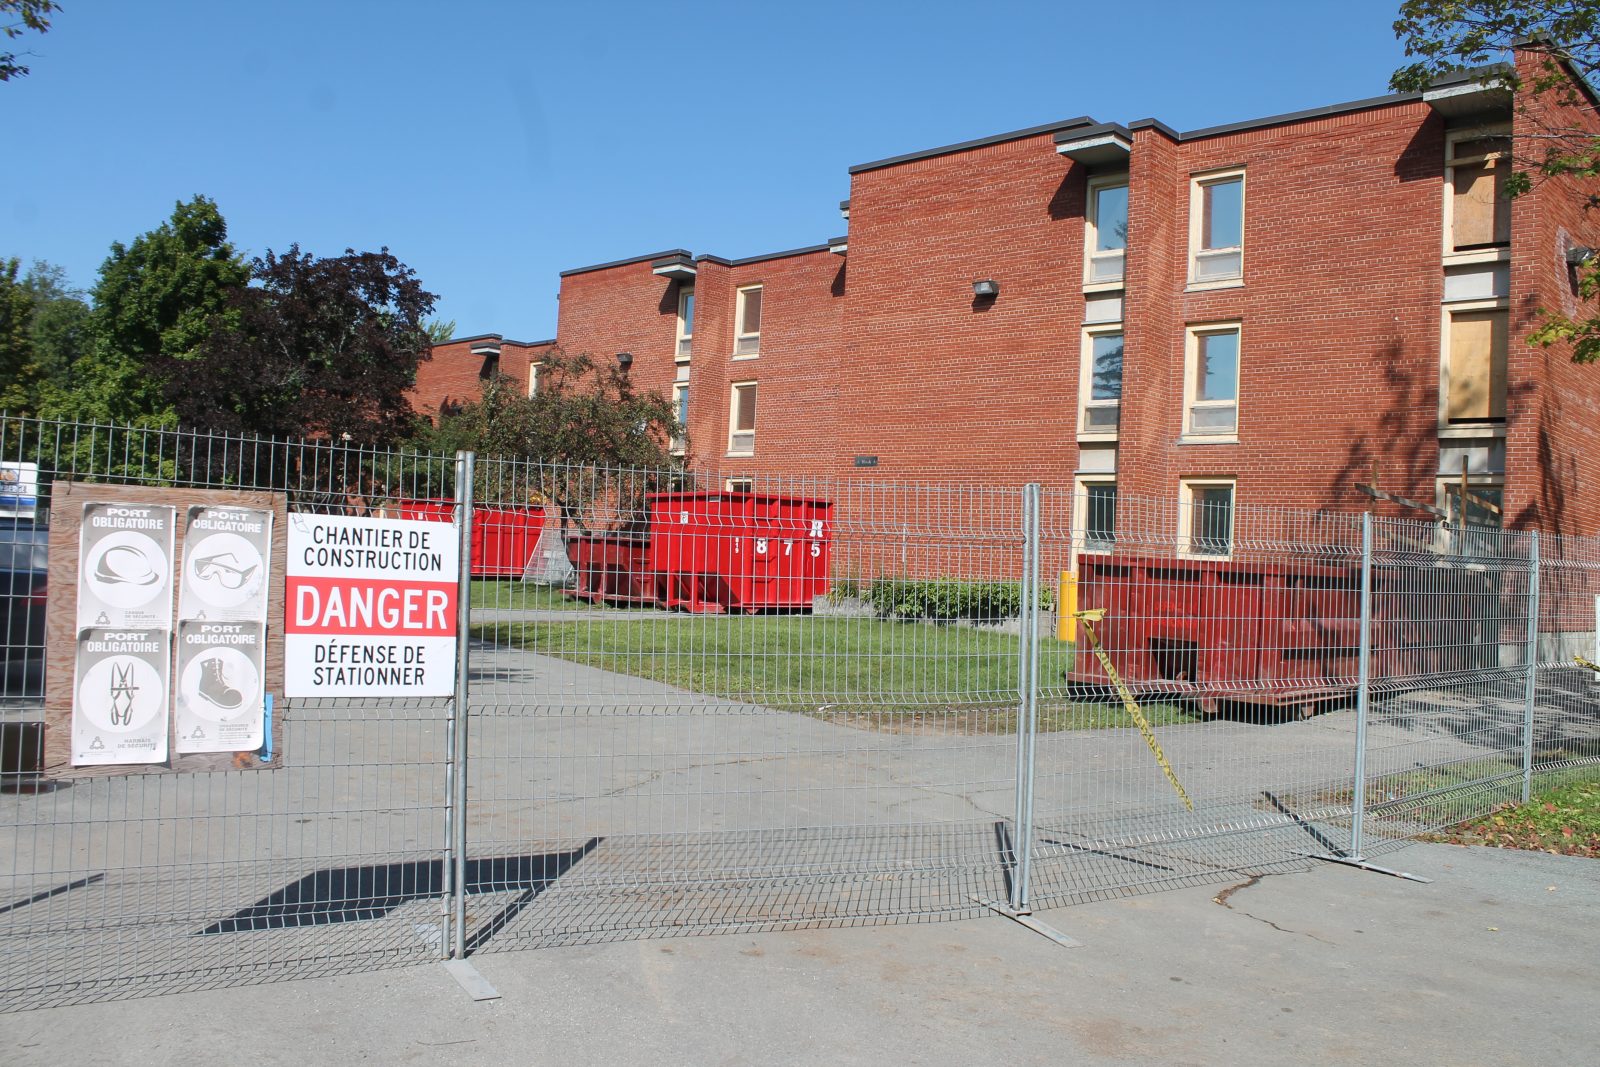 BU residence renovations to cost $50 million over five years